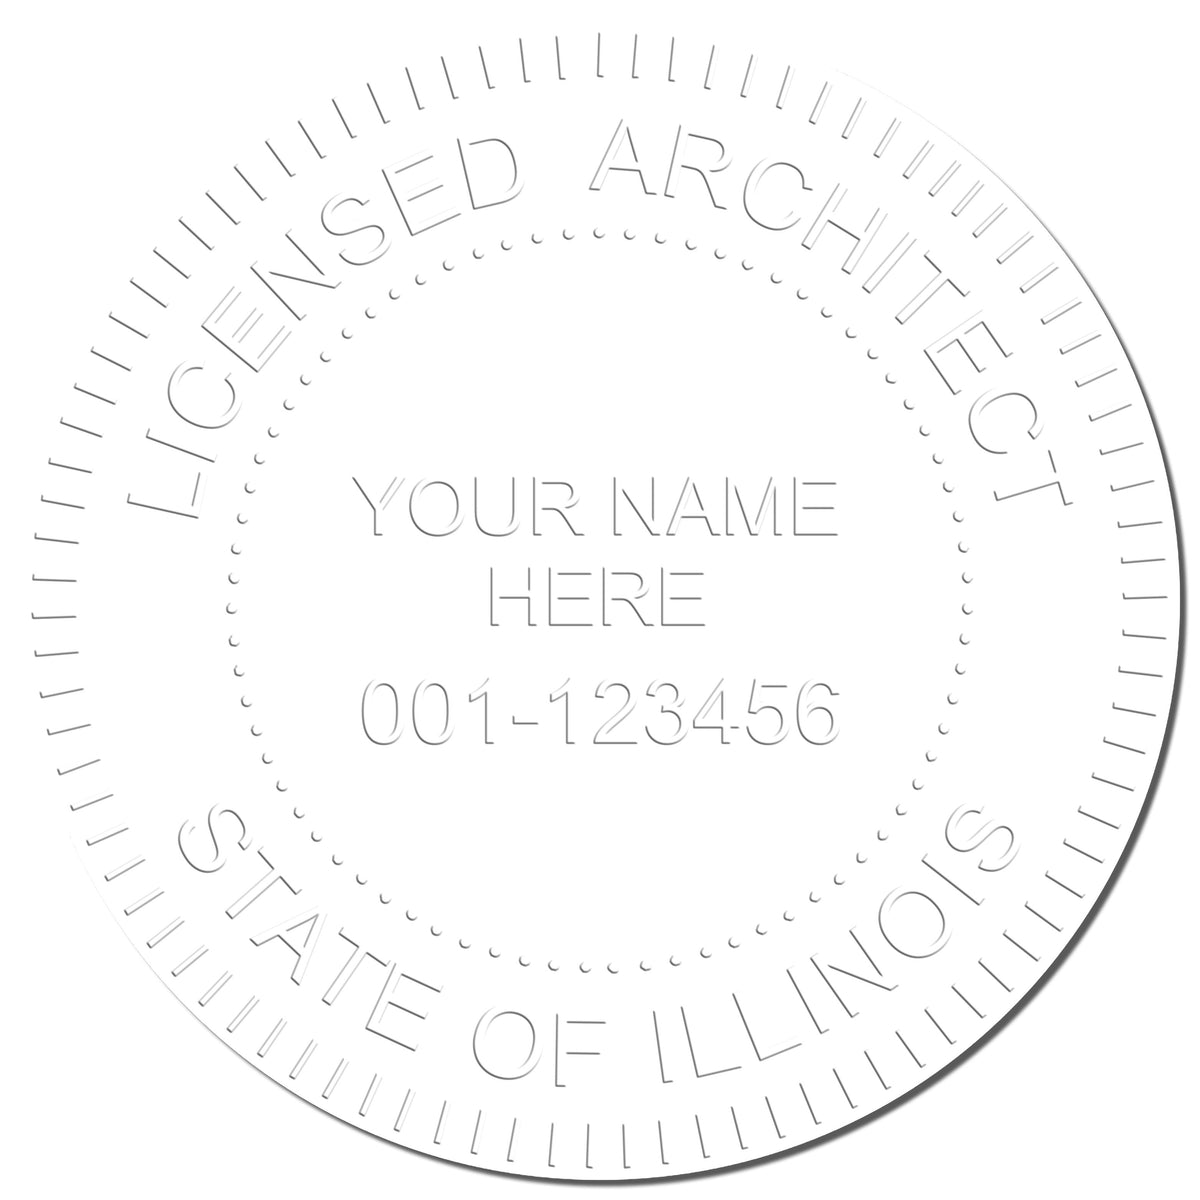 This paper is stamped with a sample imprint of the State of Illinois Architectural Seal Embosser, signifying its quality and reliability.